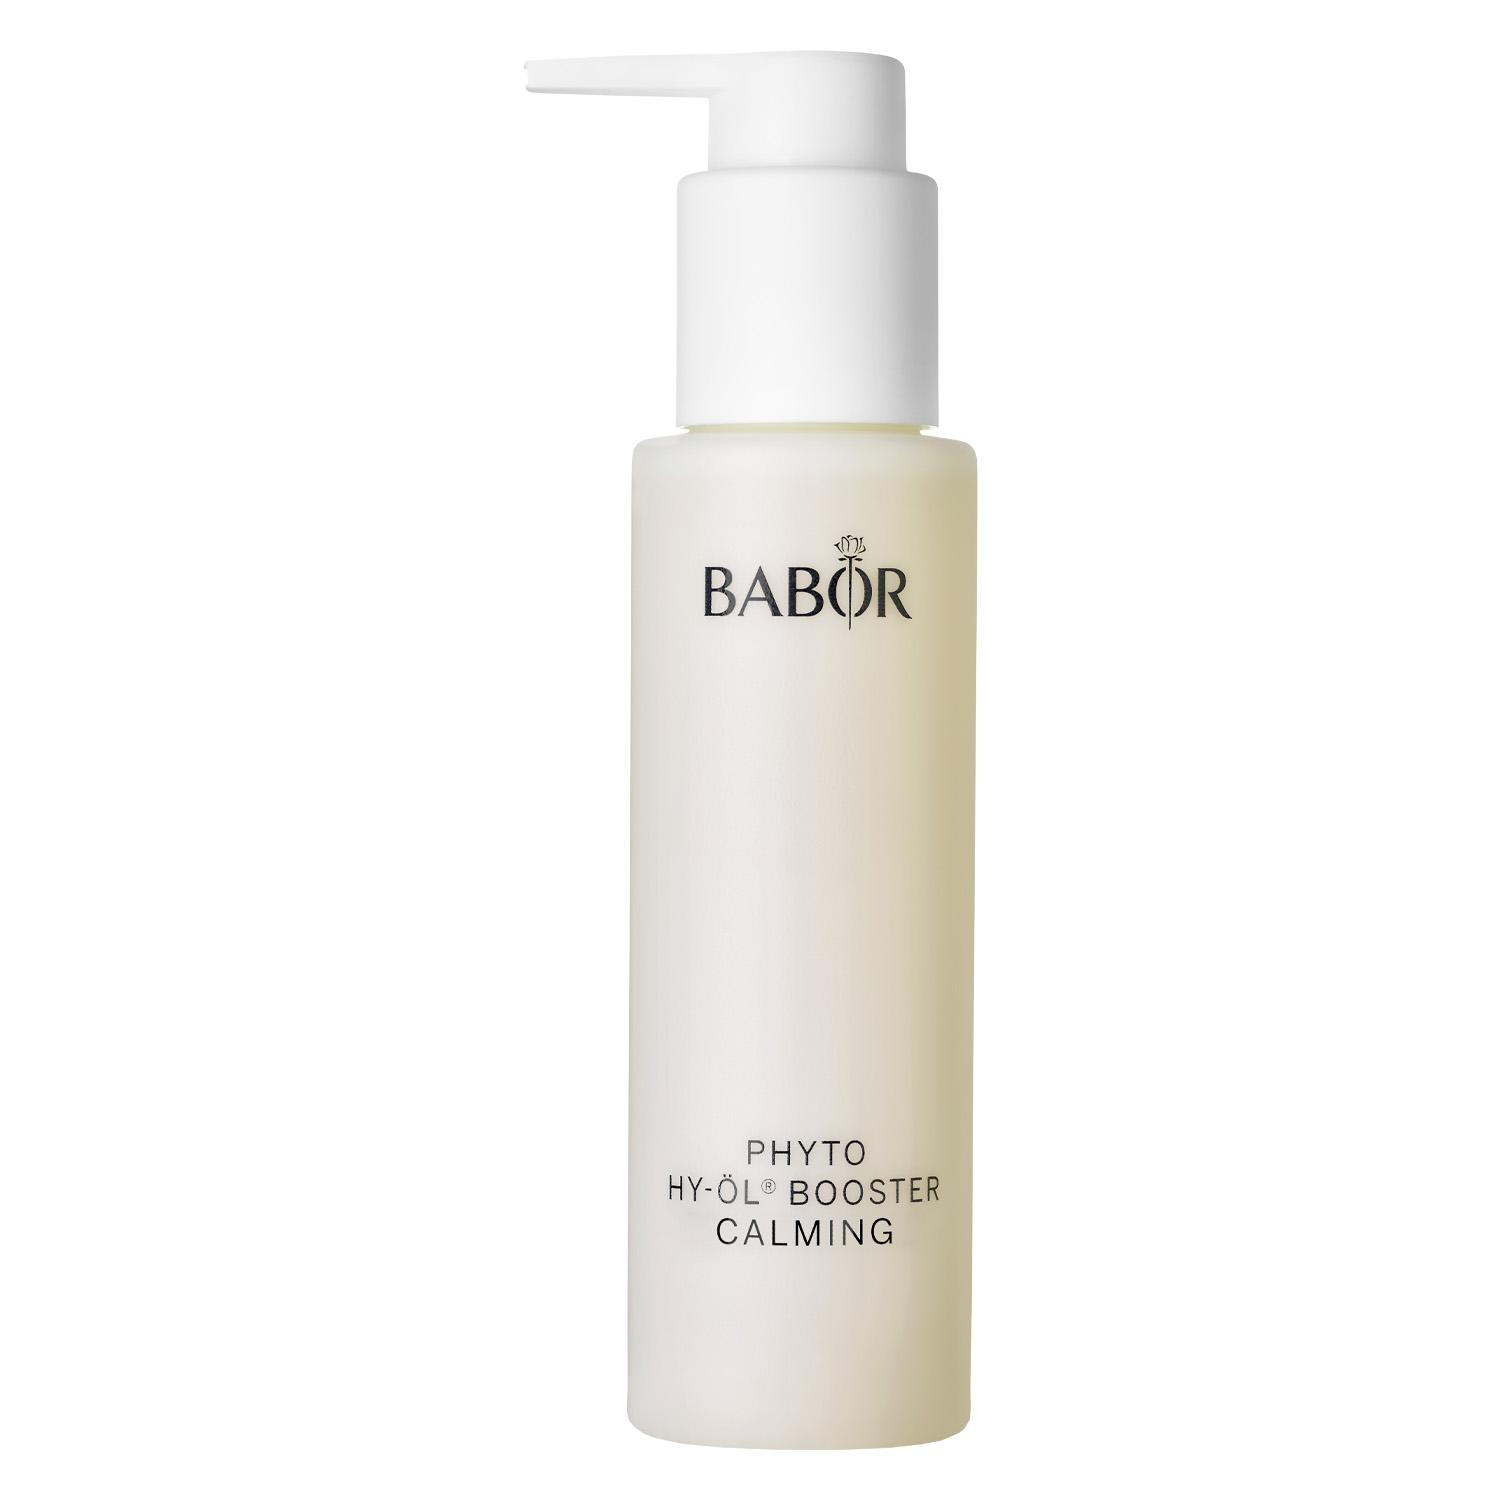 BABOR CLEANSING - Phyto HY-ÖL® Booster Calming